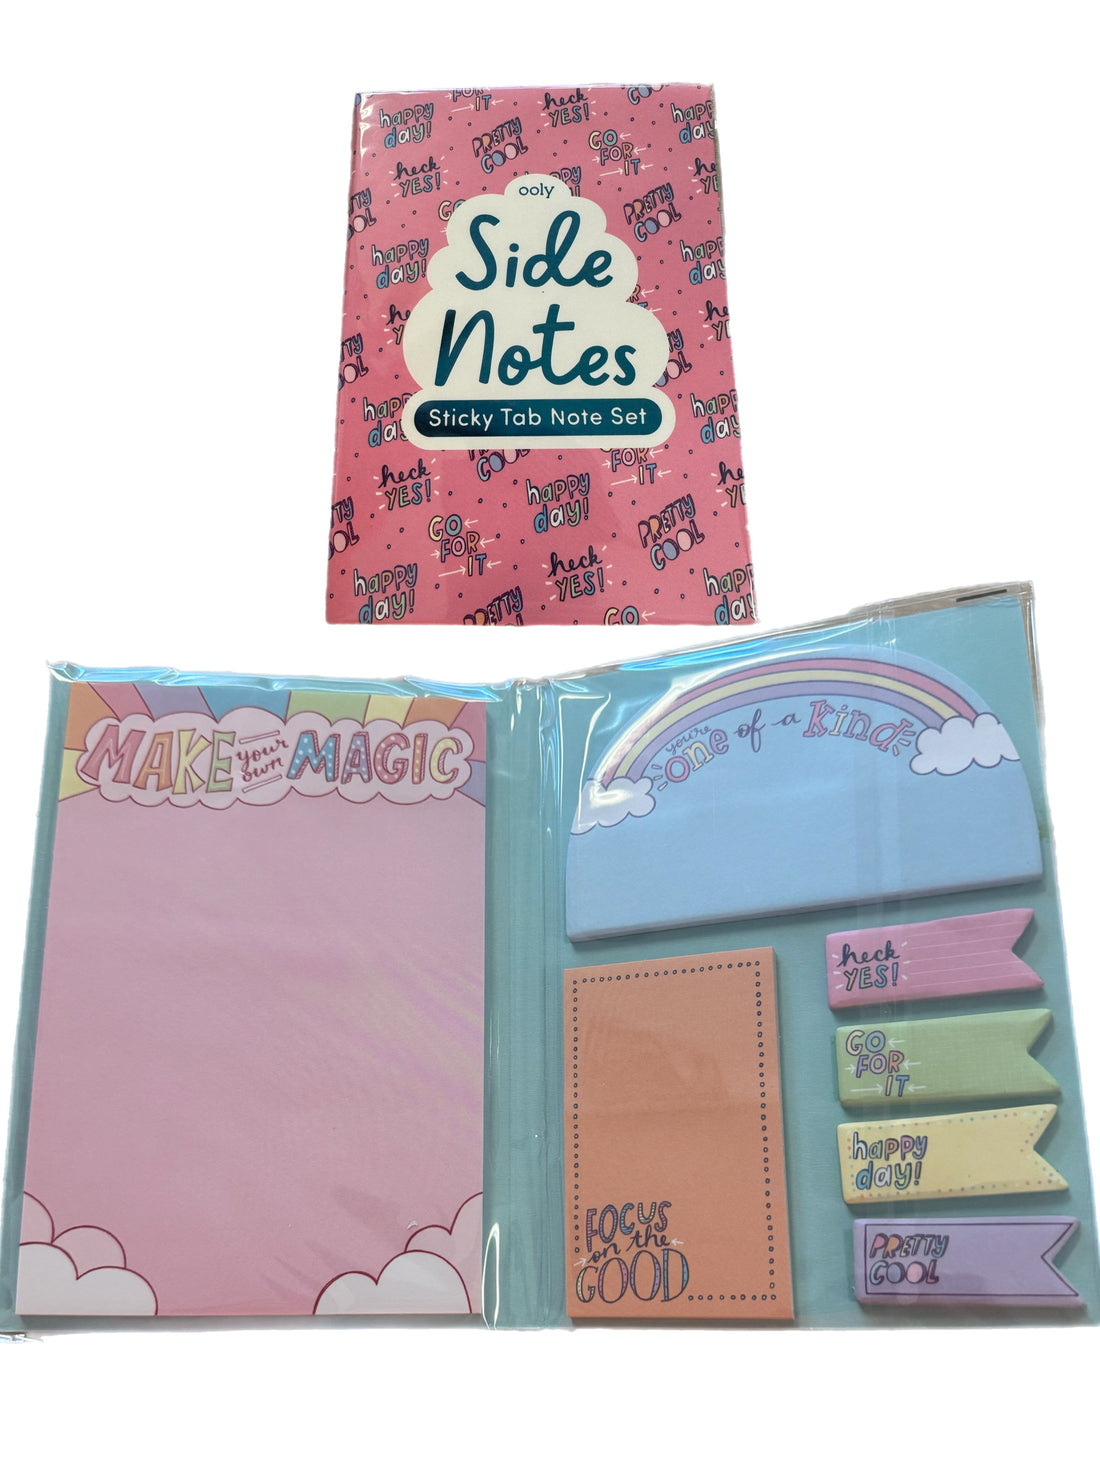 Side Notes Sticky Tab Note Set - Make Magic